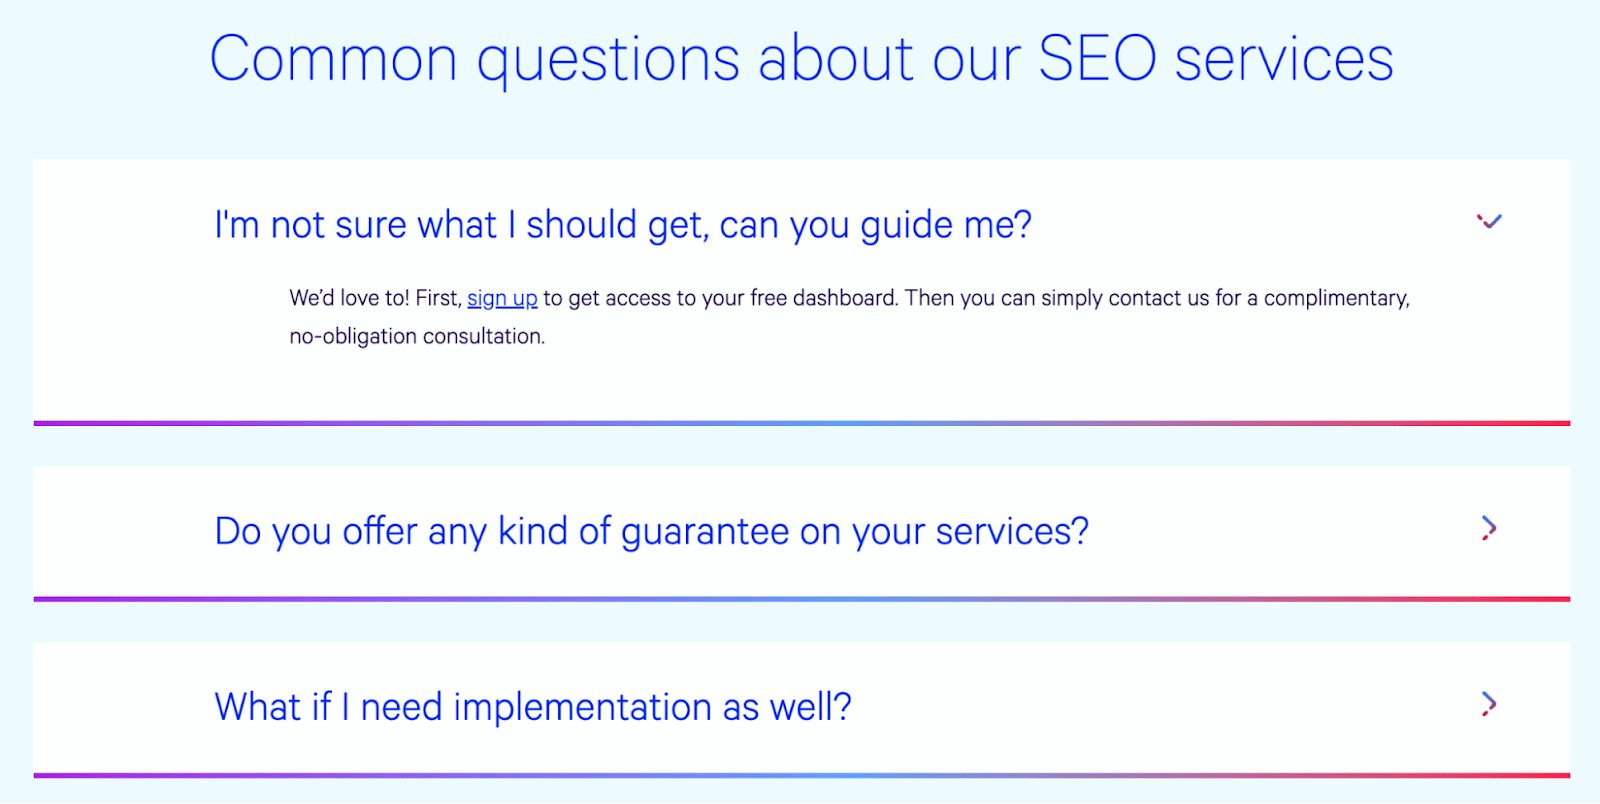 FAQ section on a product/service page